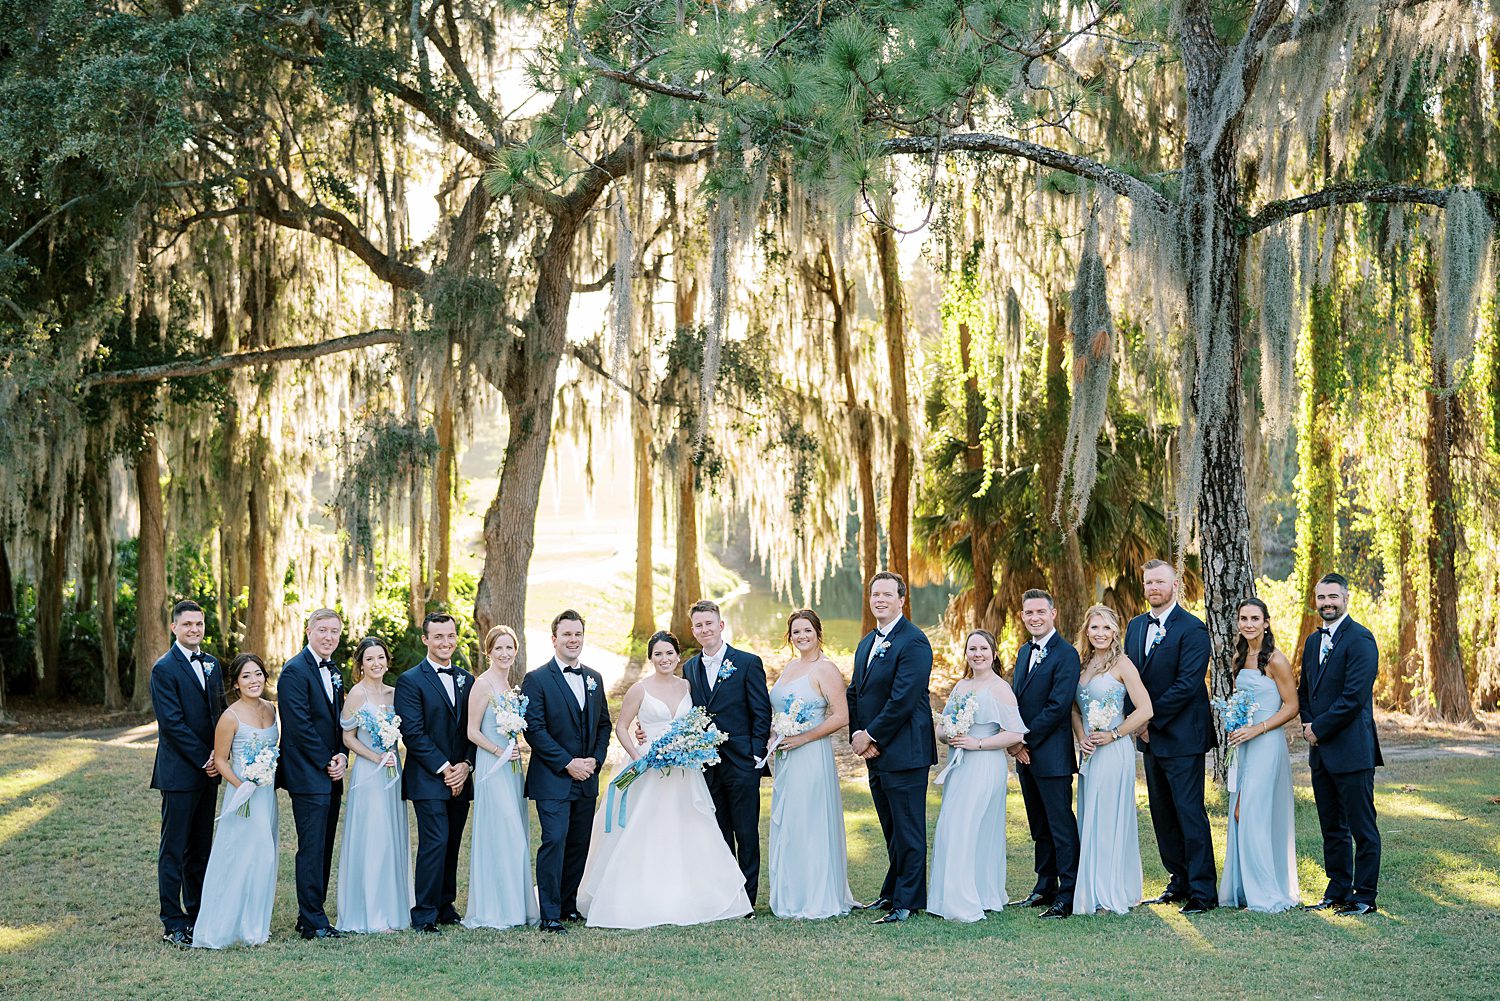 bride and groom stand with wedding party in light blue and navy attire 